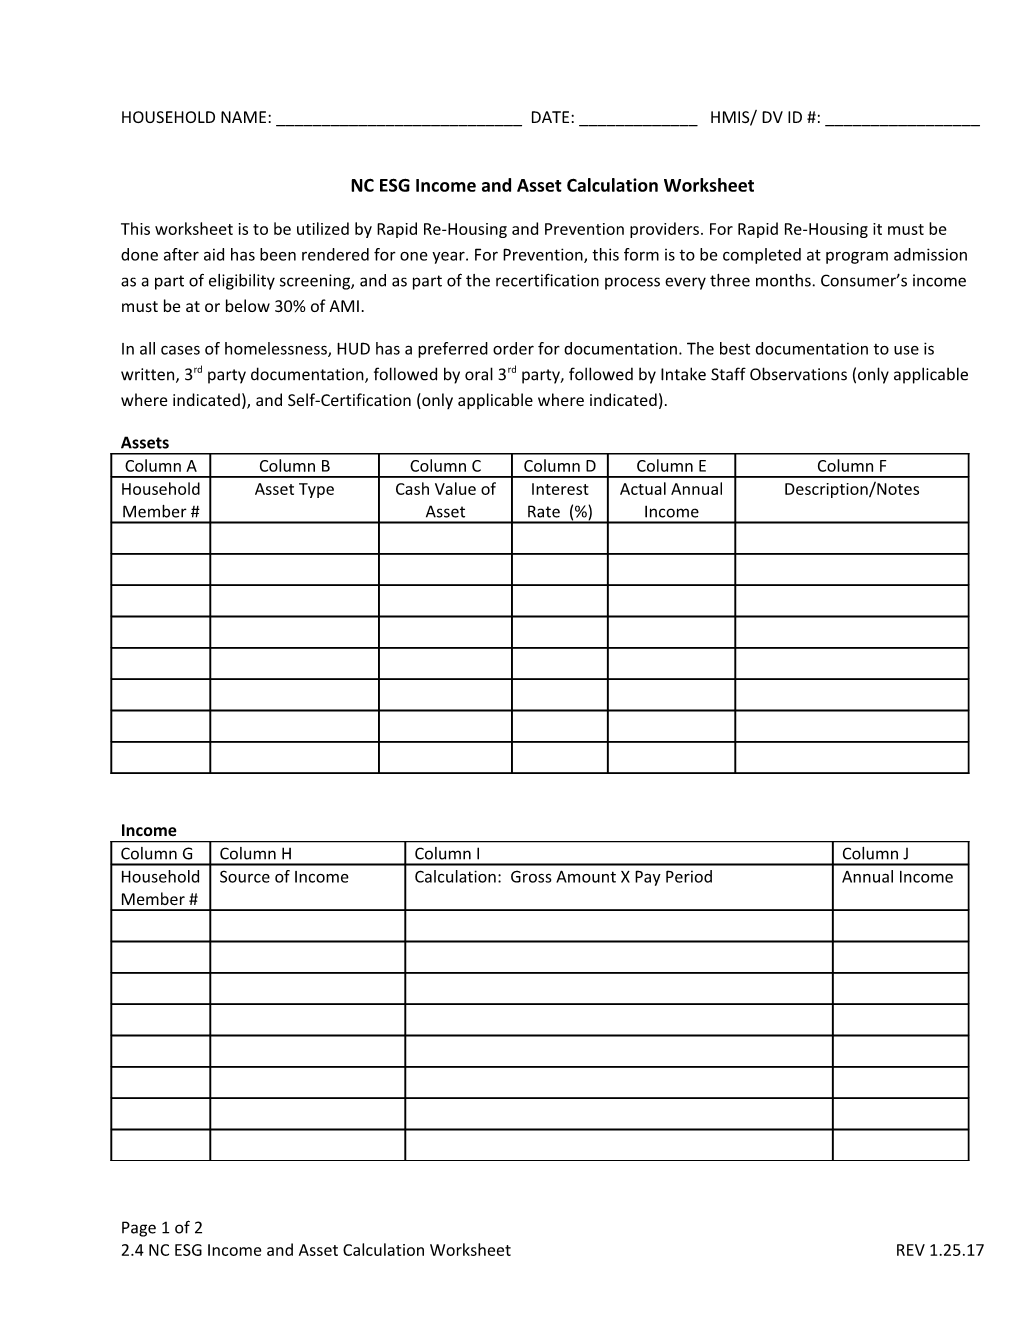 NC HPRP Income and Asset Calculation Worksheet